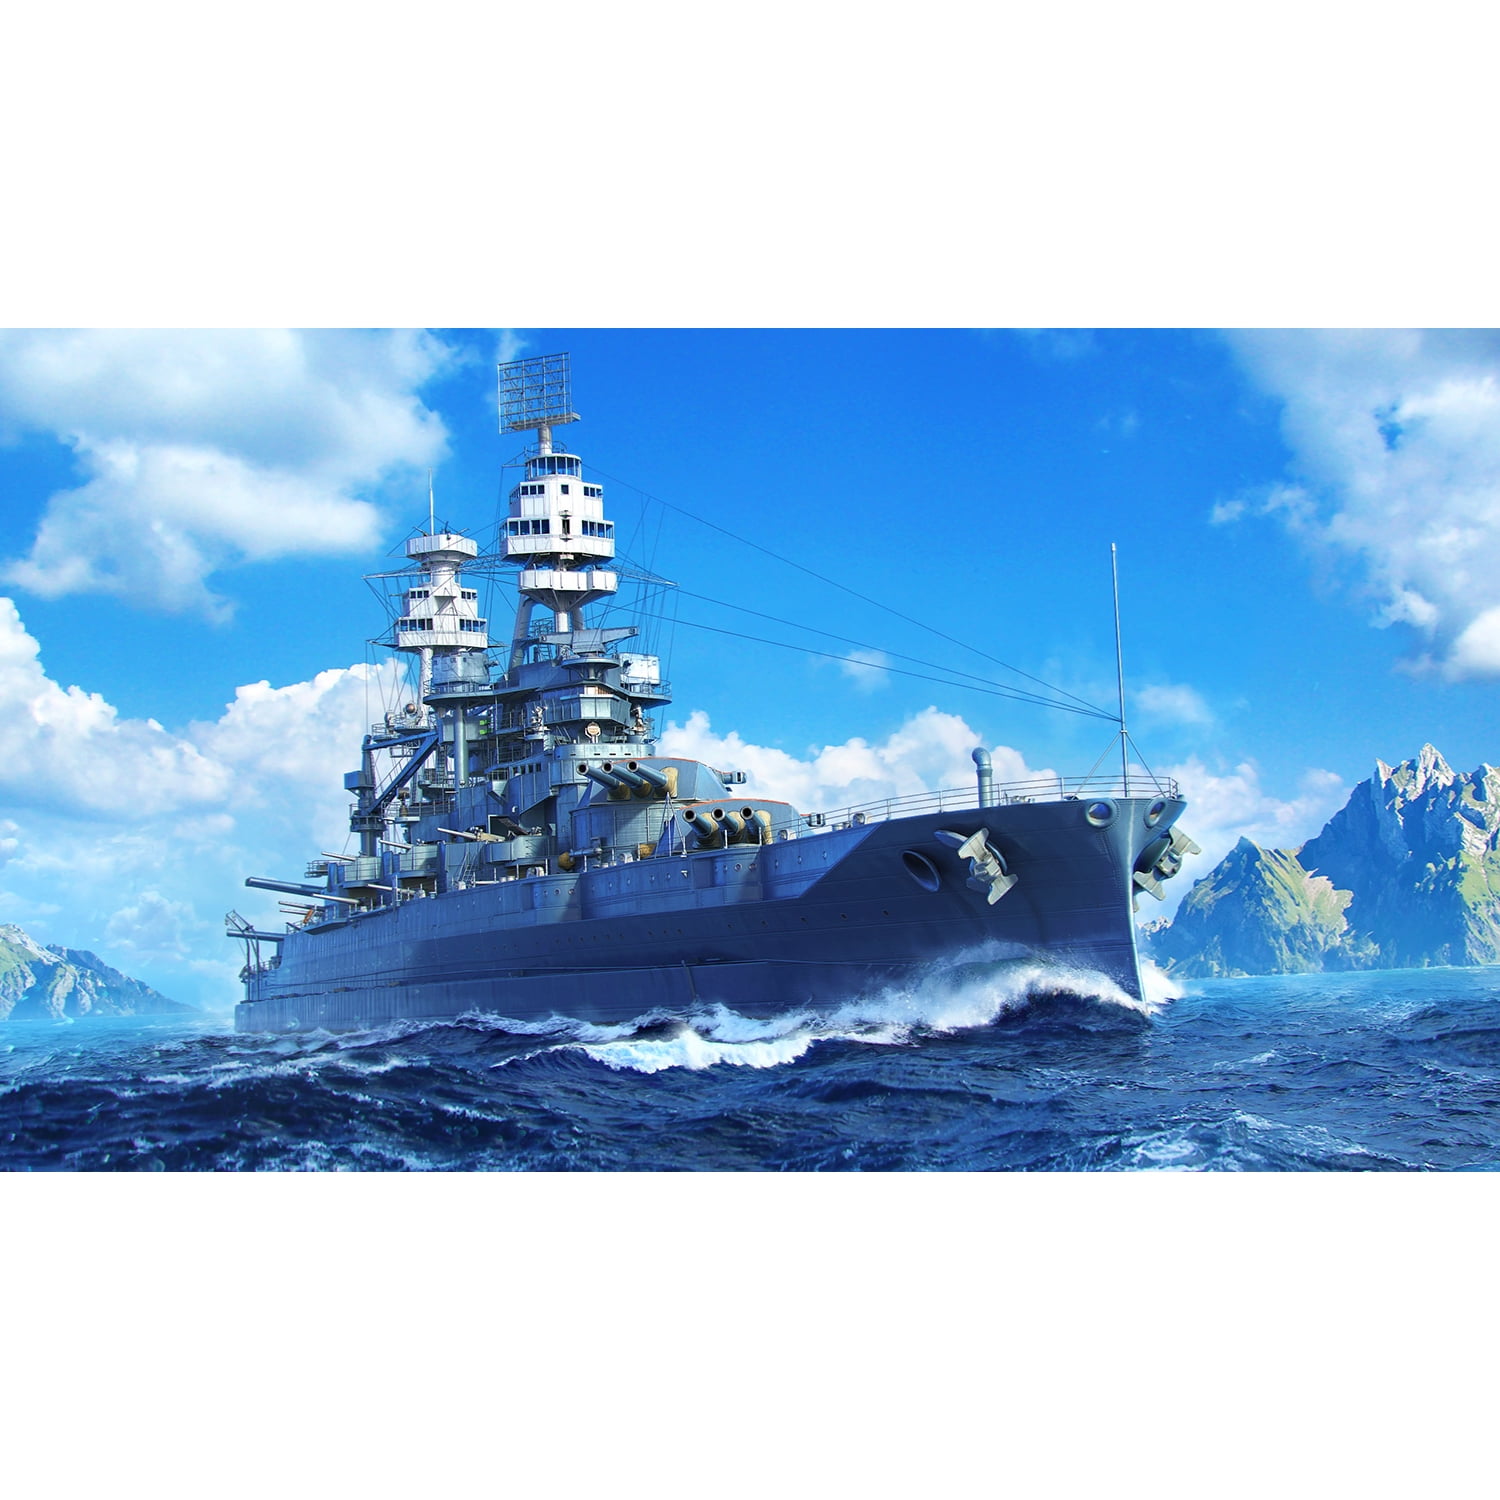 World of Warships: Legends (@wows_legends) on Threads